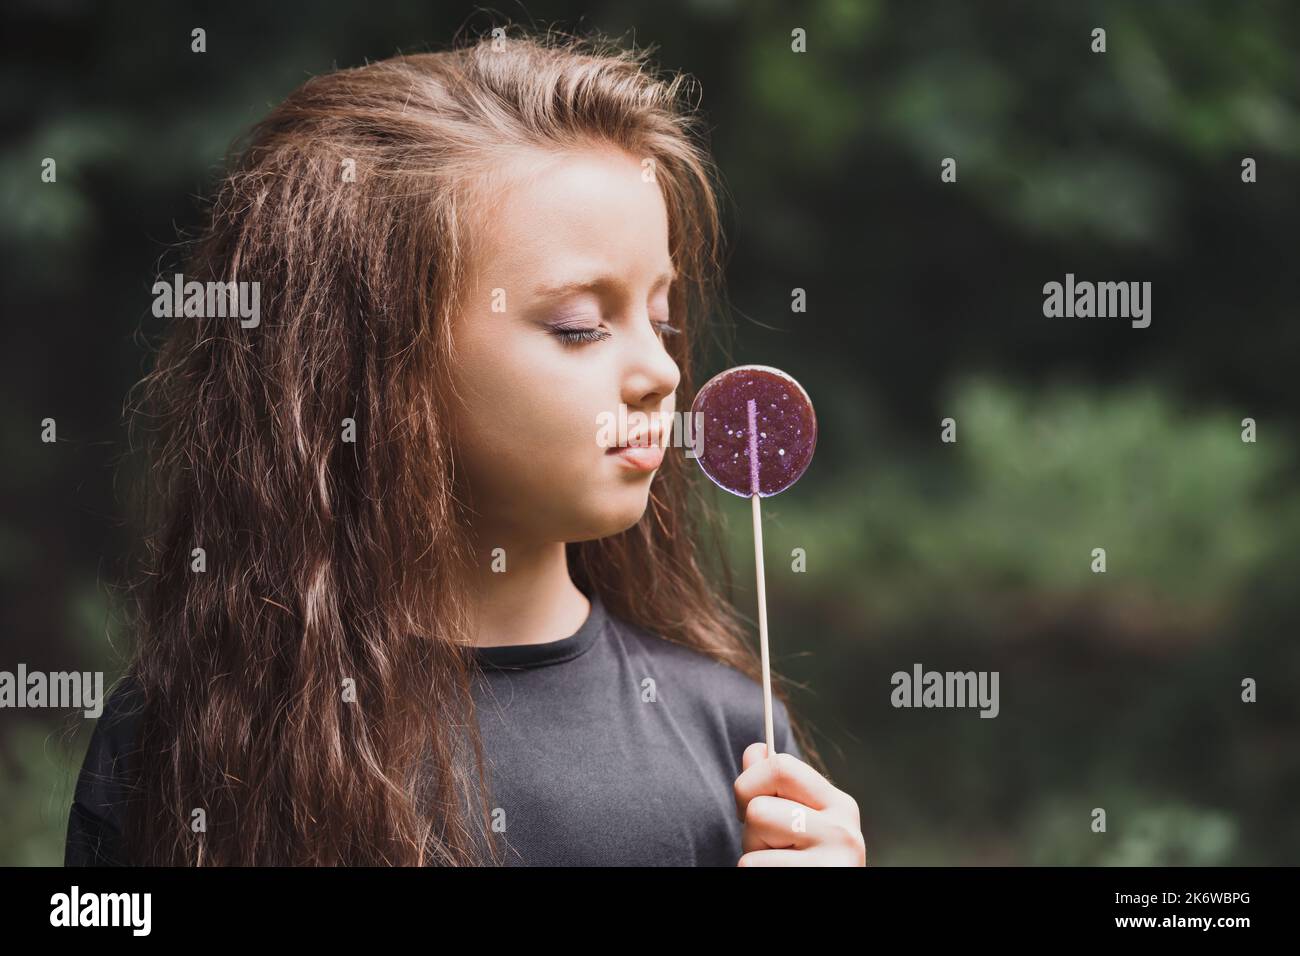 A cute girl in black clothes with a purple candy on a stick Stock Photo